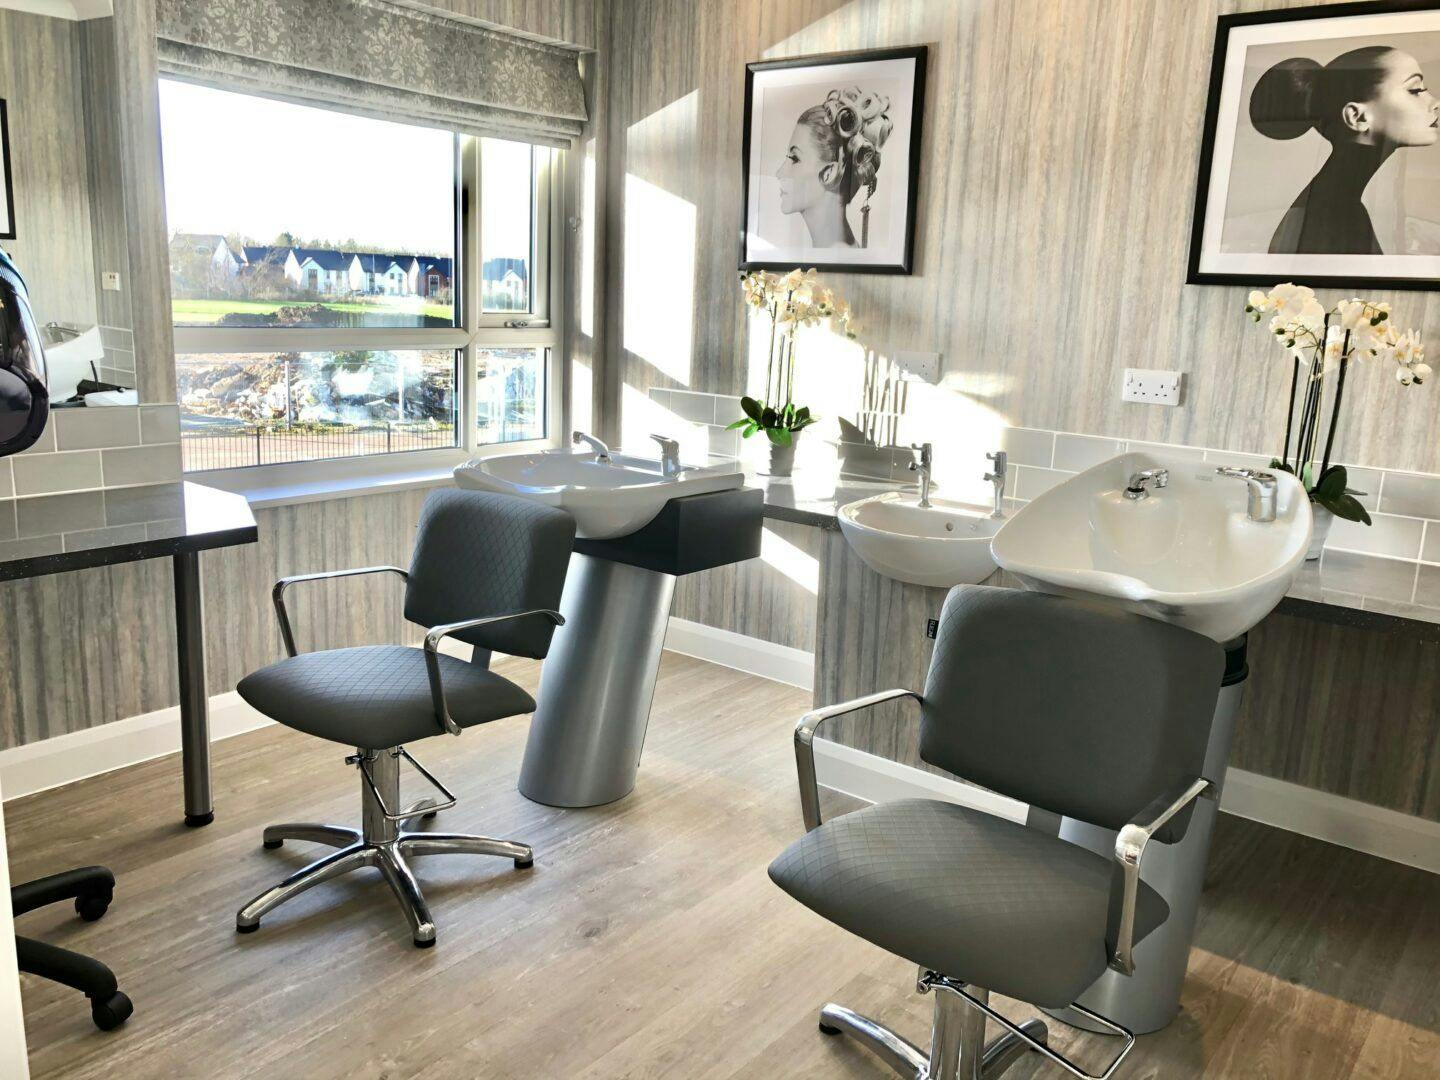 Salon at Bishop's Cleeve Care Home in Cheltenham, Gloucestershire